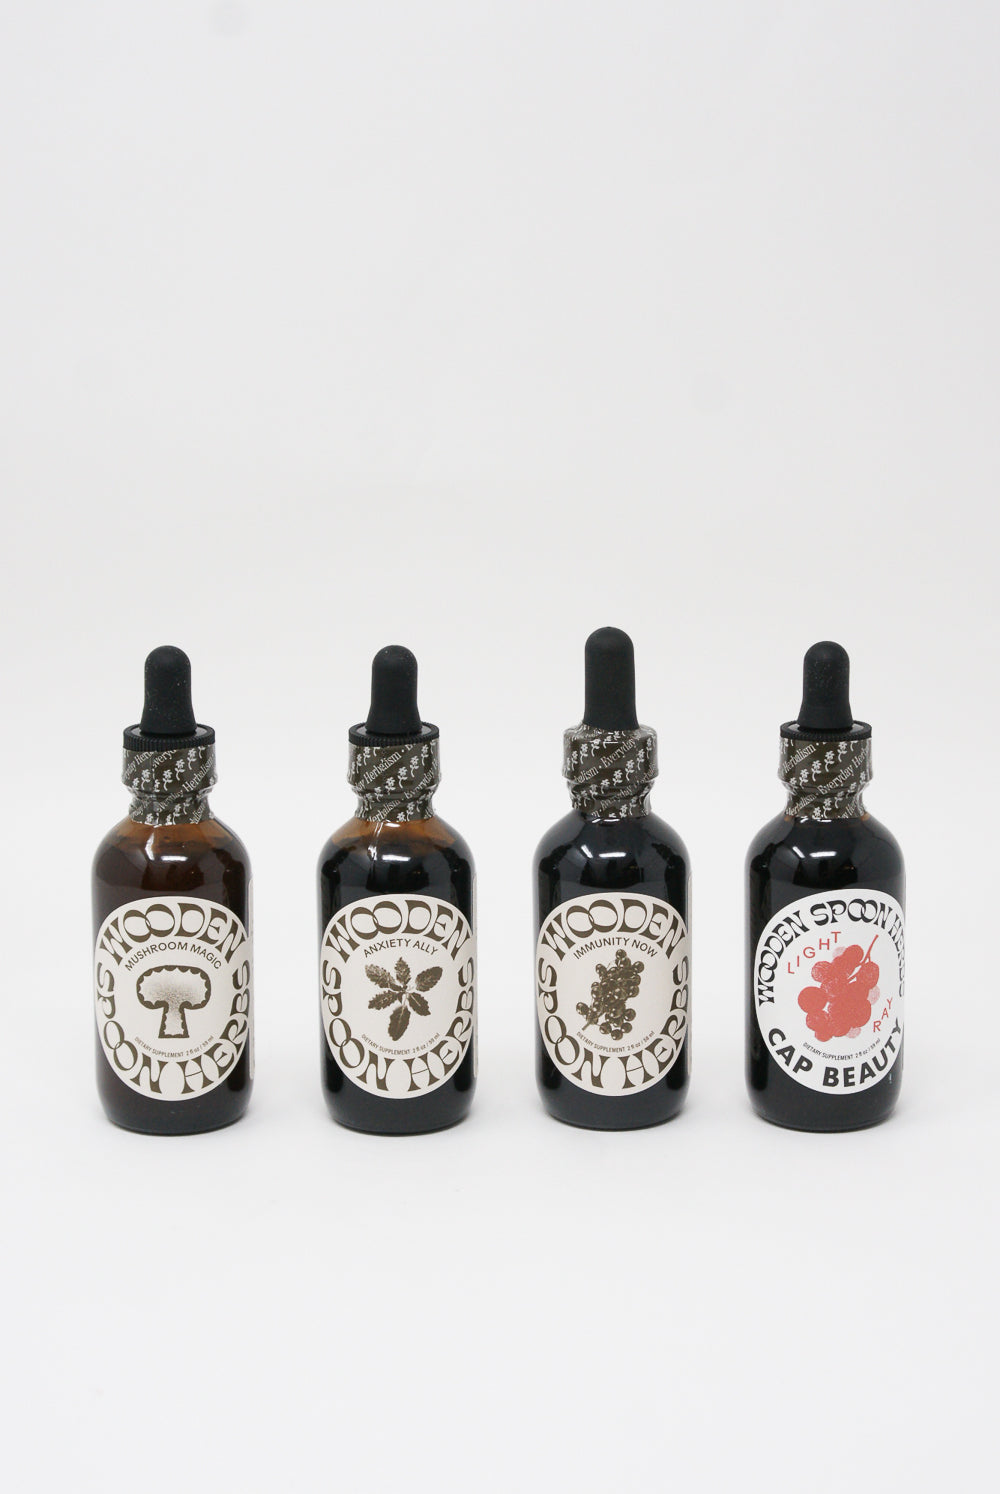 Four bottles of Wooden Spoon Herbs Anxiety Ally Tincture with varying labels displayed against a white background.